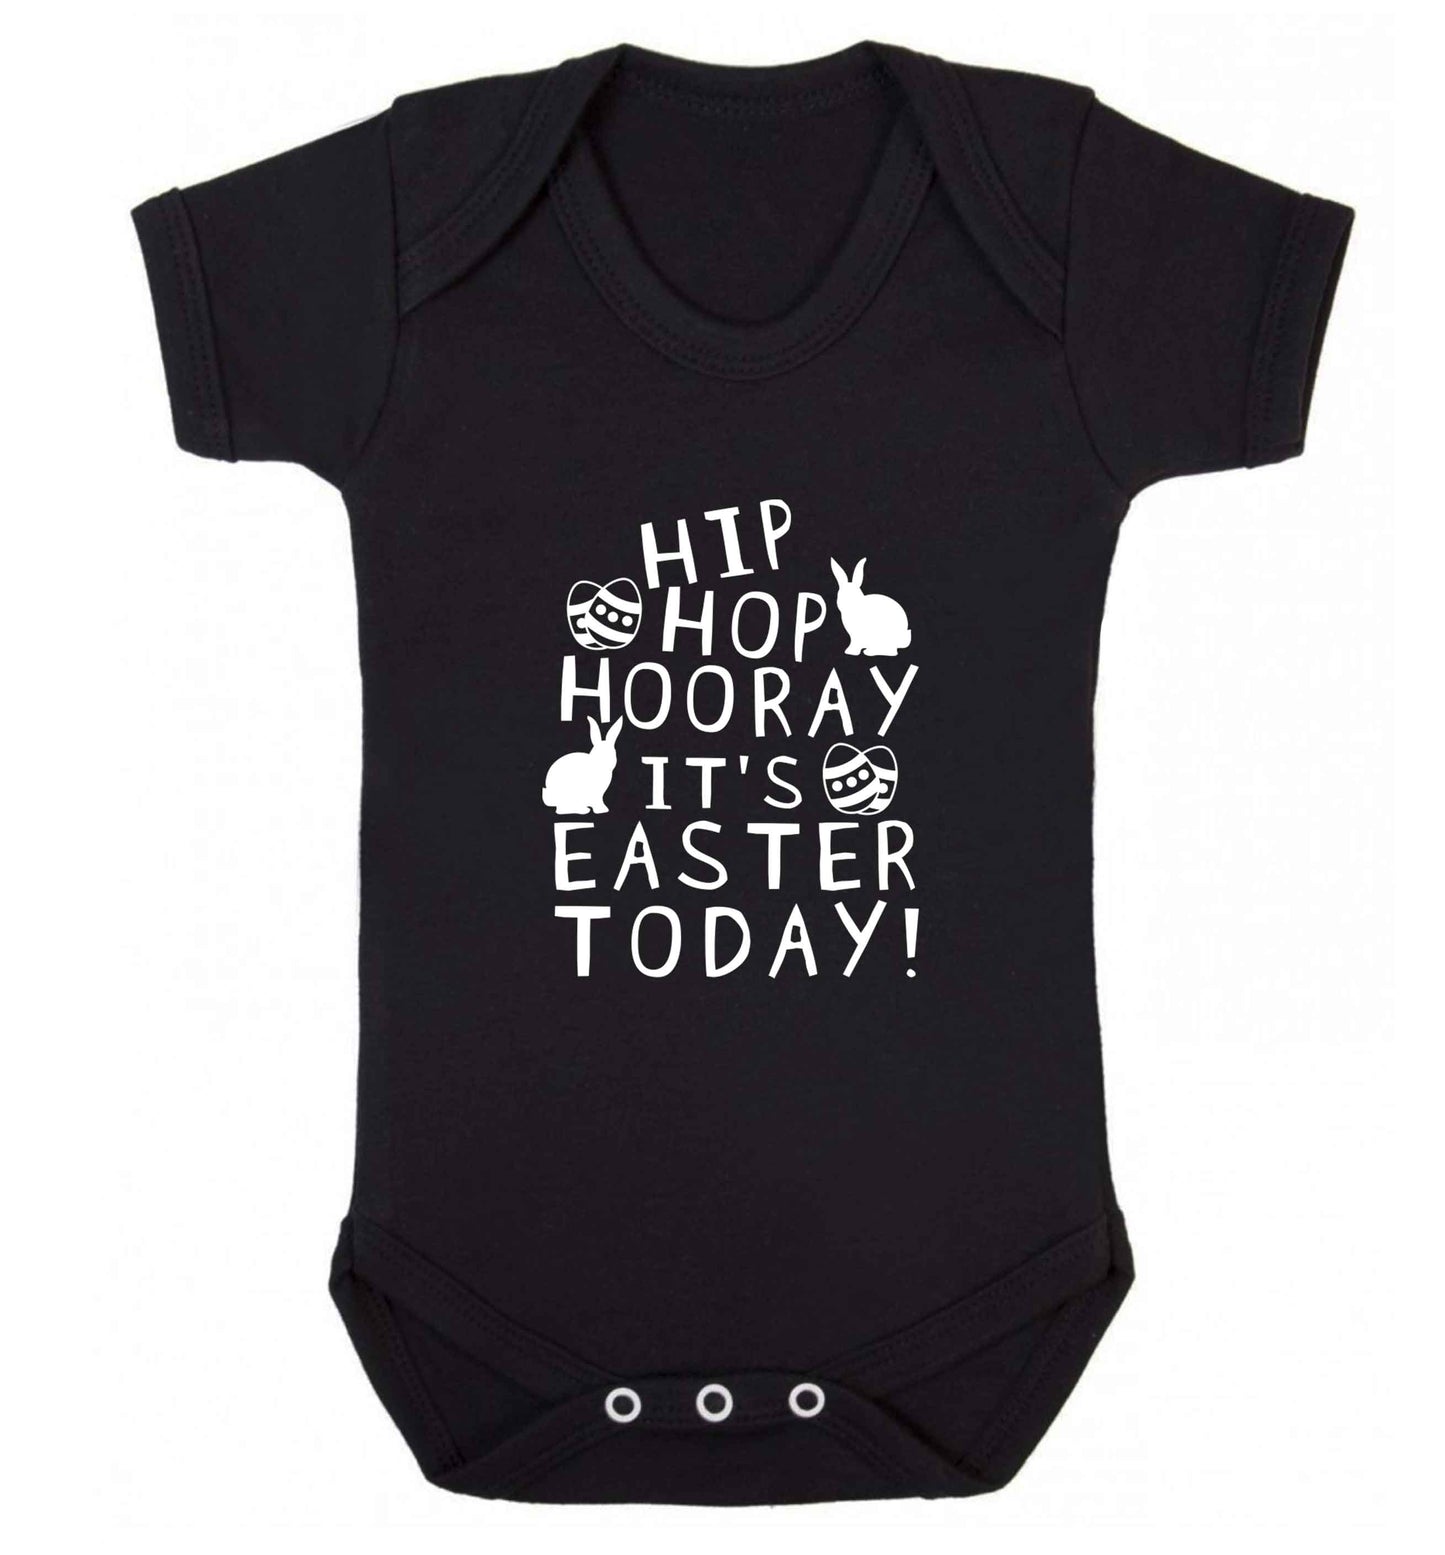 Hip hip hooray it's Easter today! baby vest black 18-24 months